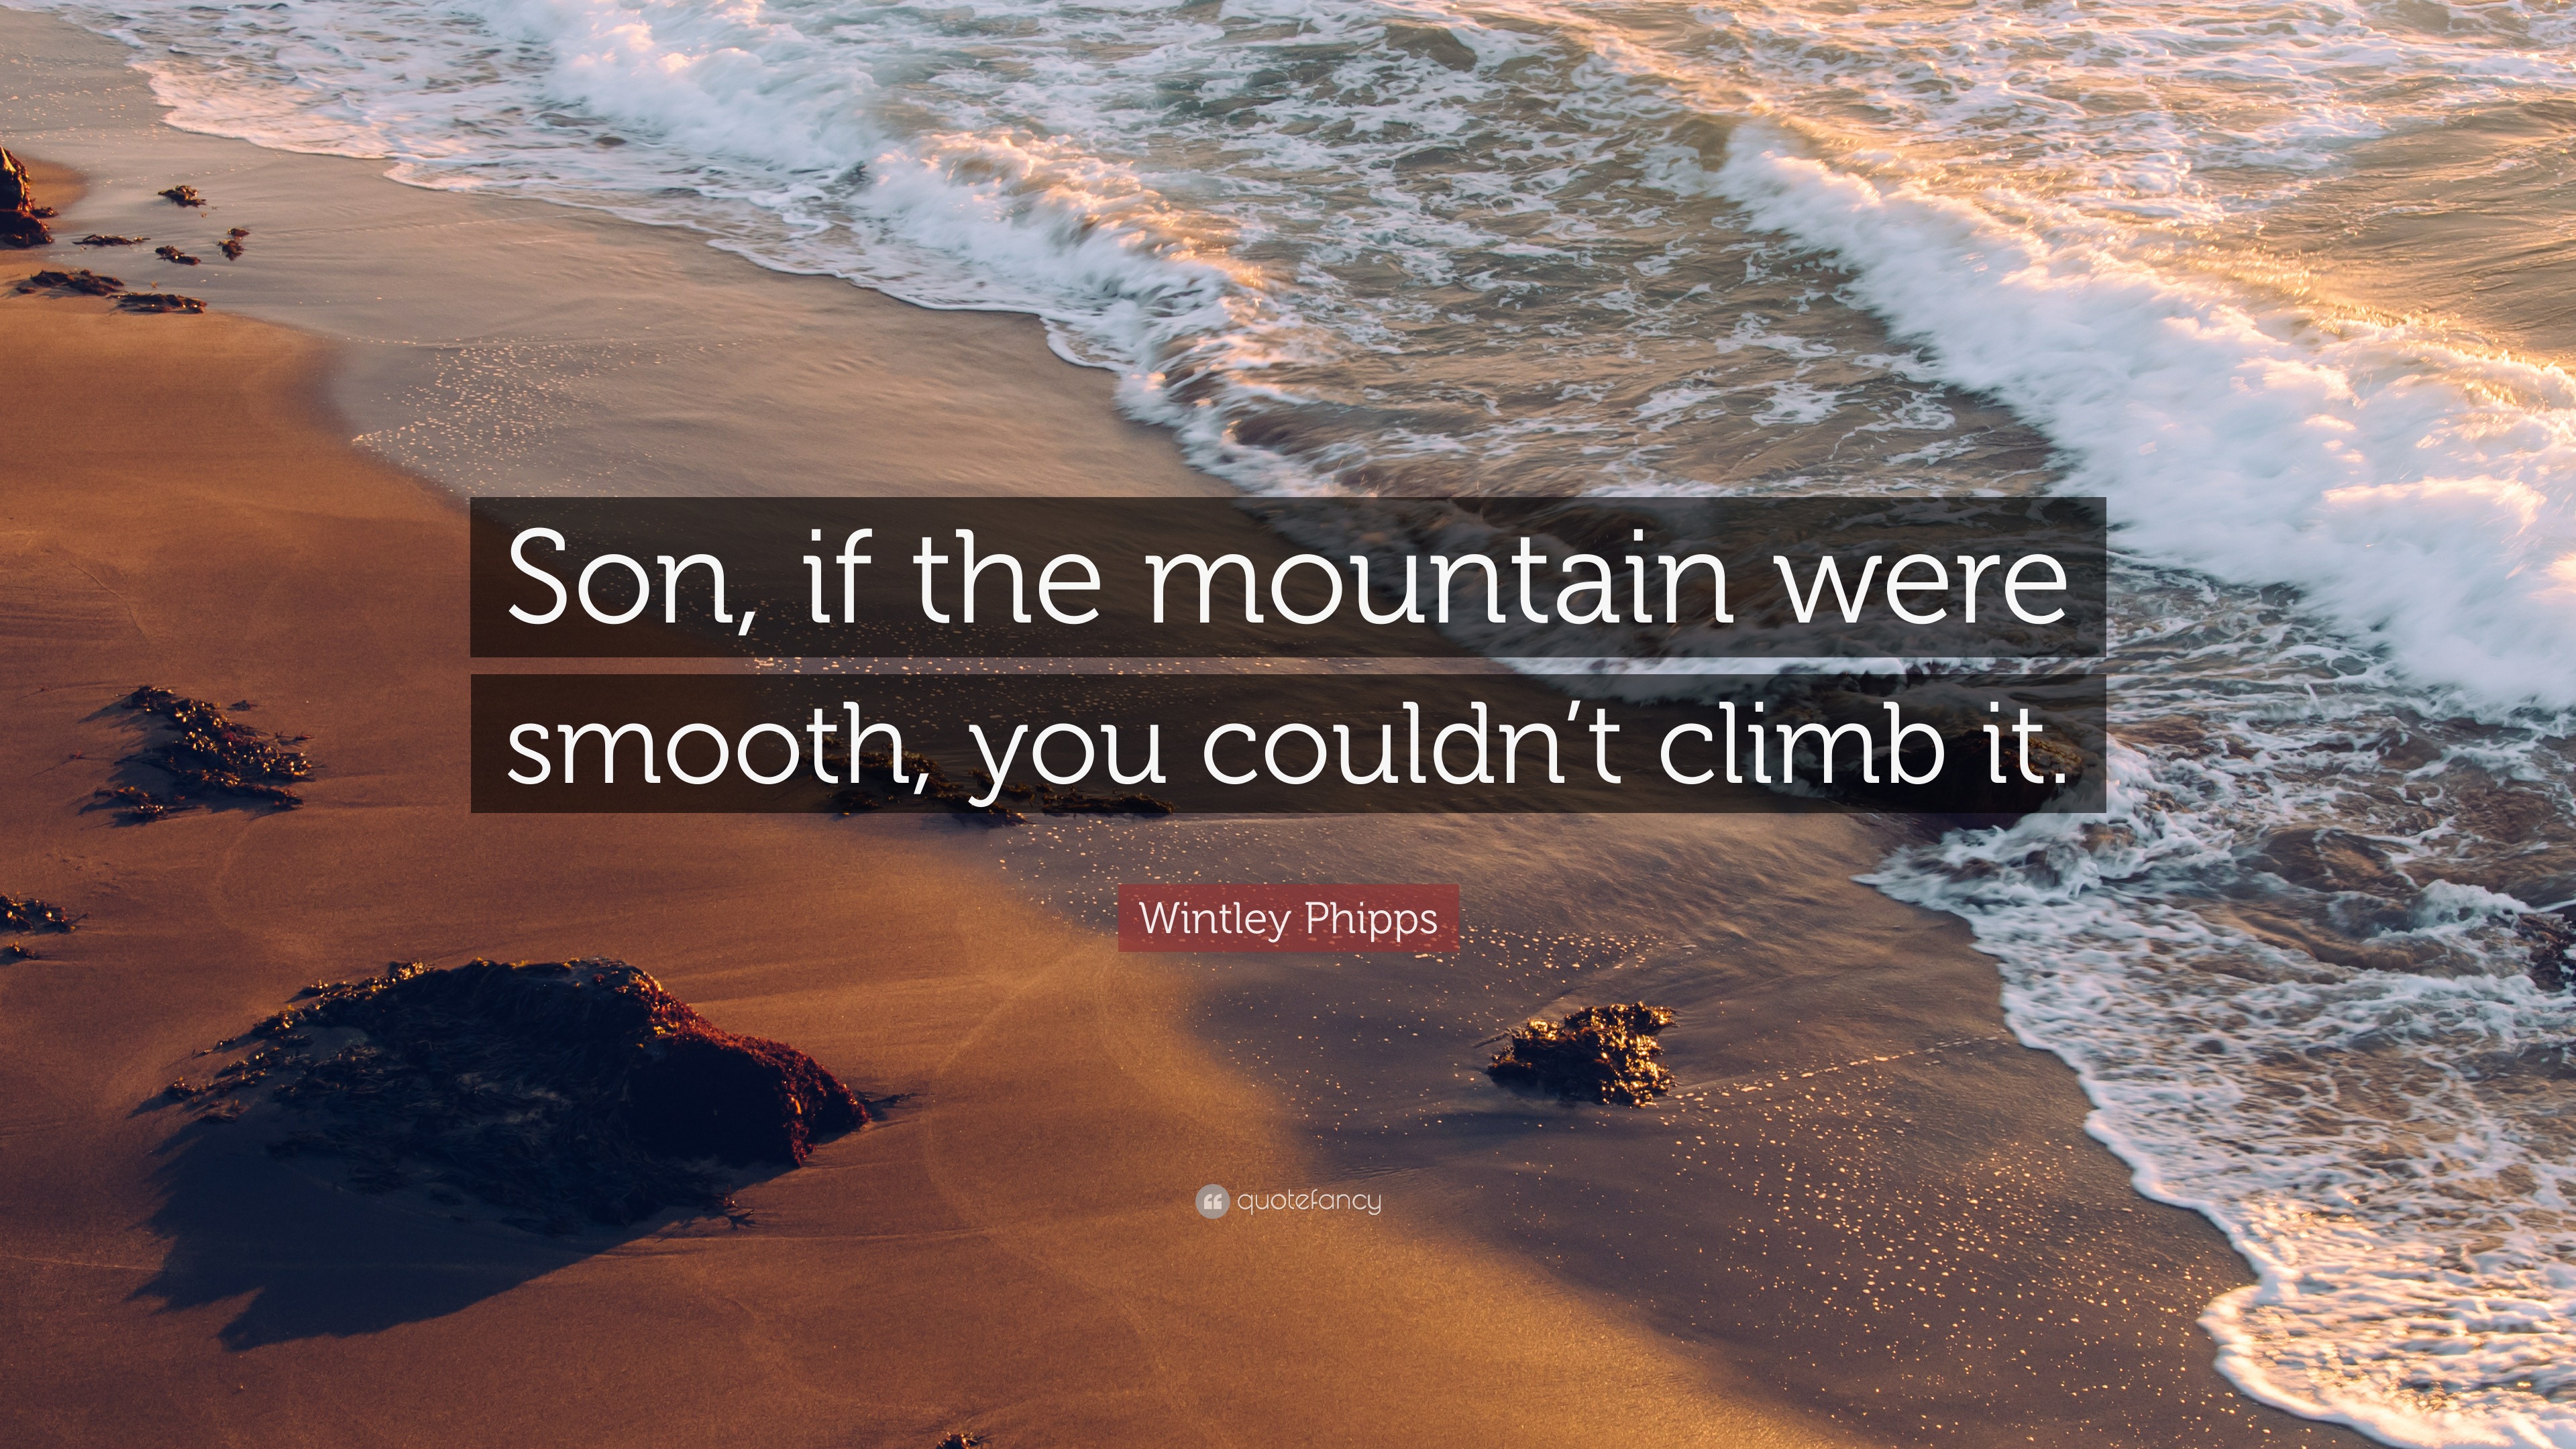 https://quotefancy.com/media/wallpaper/3840x2160/2442323-Wintley-Phipps-Quote-Son-if-the-mountain-were-smooth-you-couldn-t.jpg